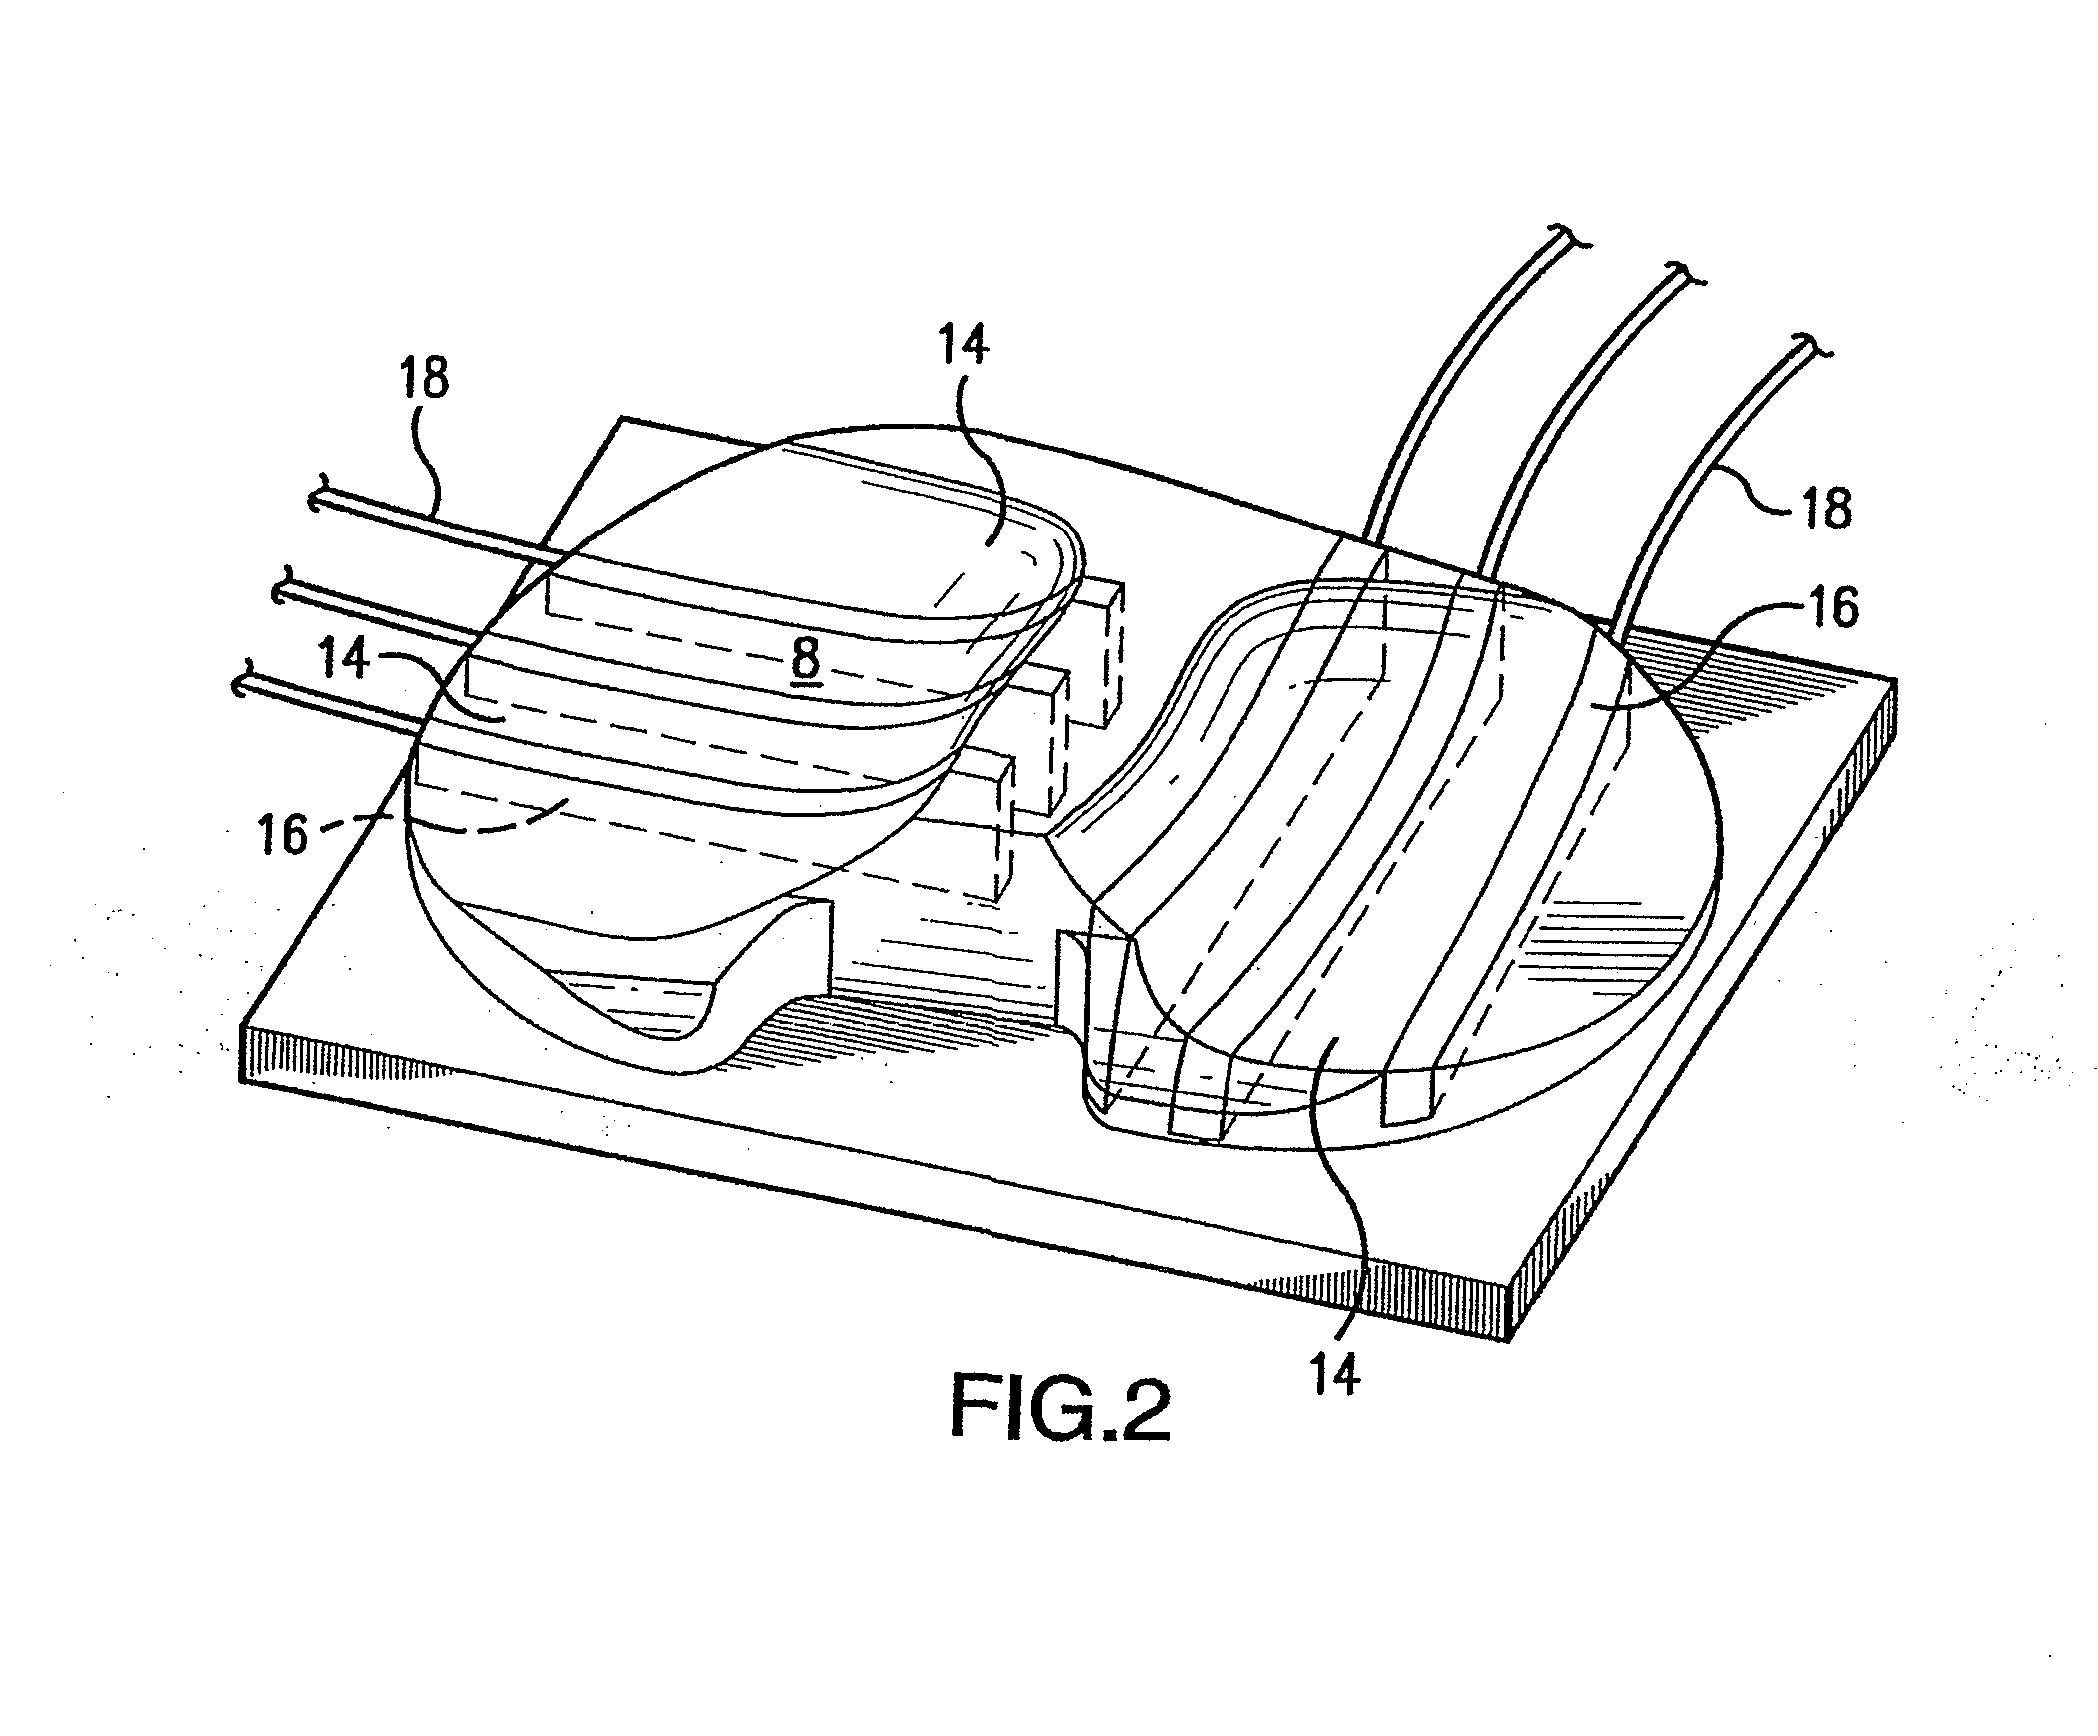 Contact sensors and methods for making same